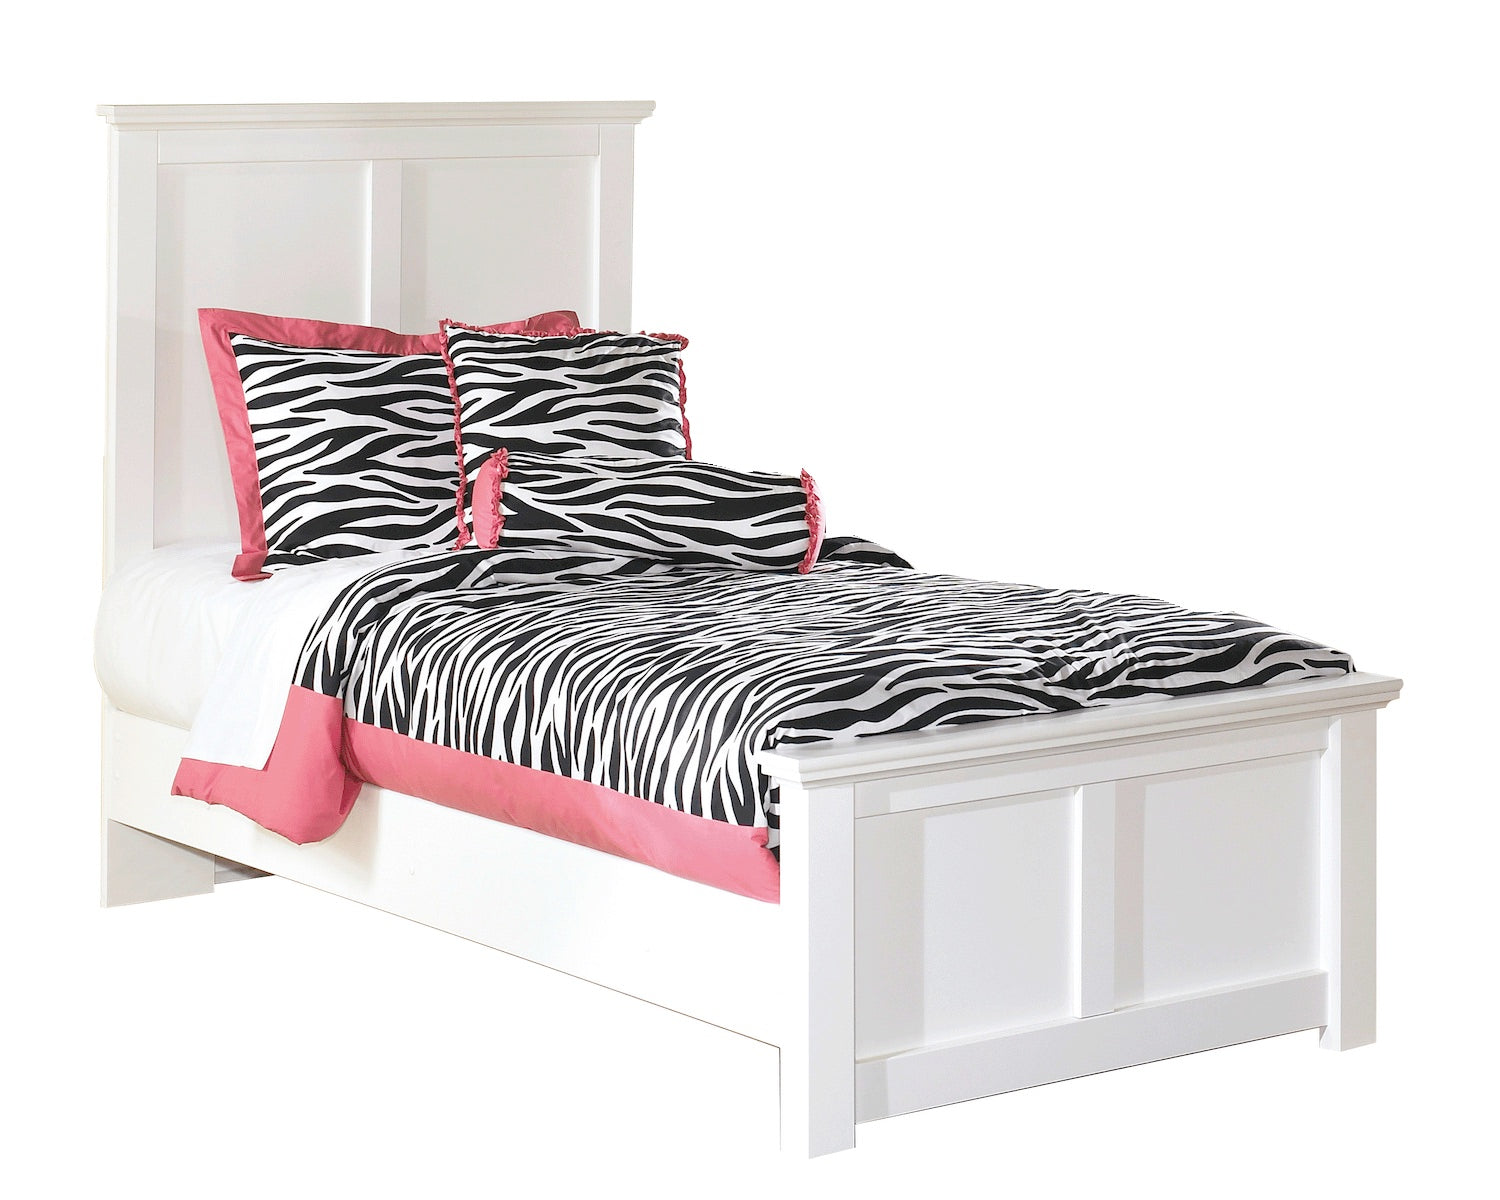 Ashley Bostwick Shoals 6PC Full Panel Bedroom Set with Two Nightstand & Chest in White - The Furniture Space.